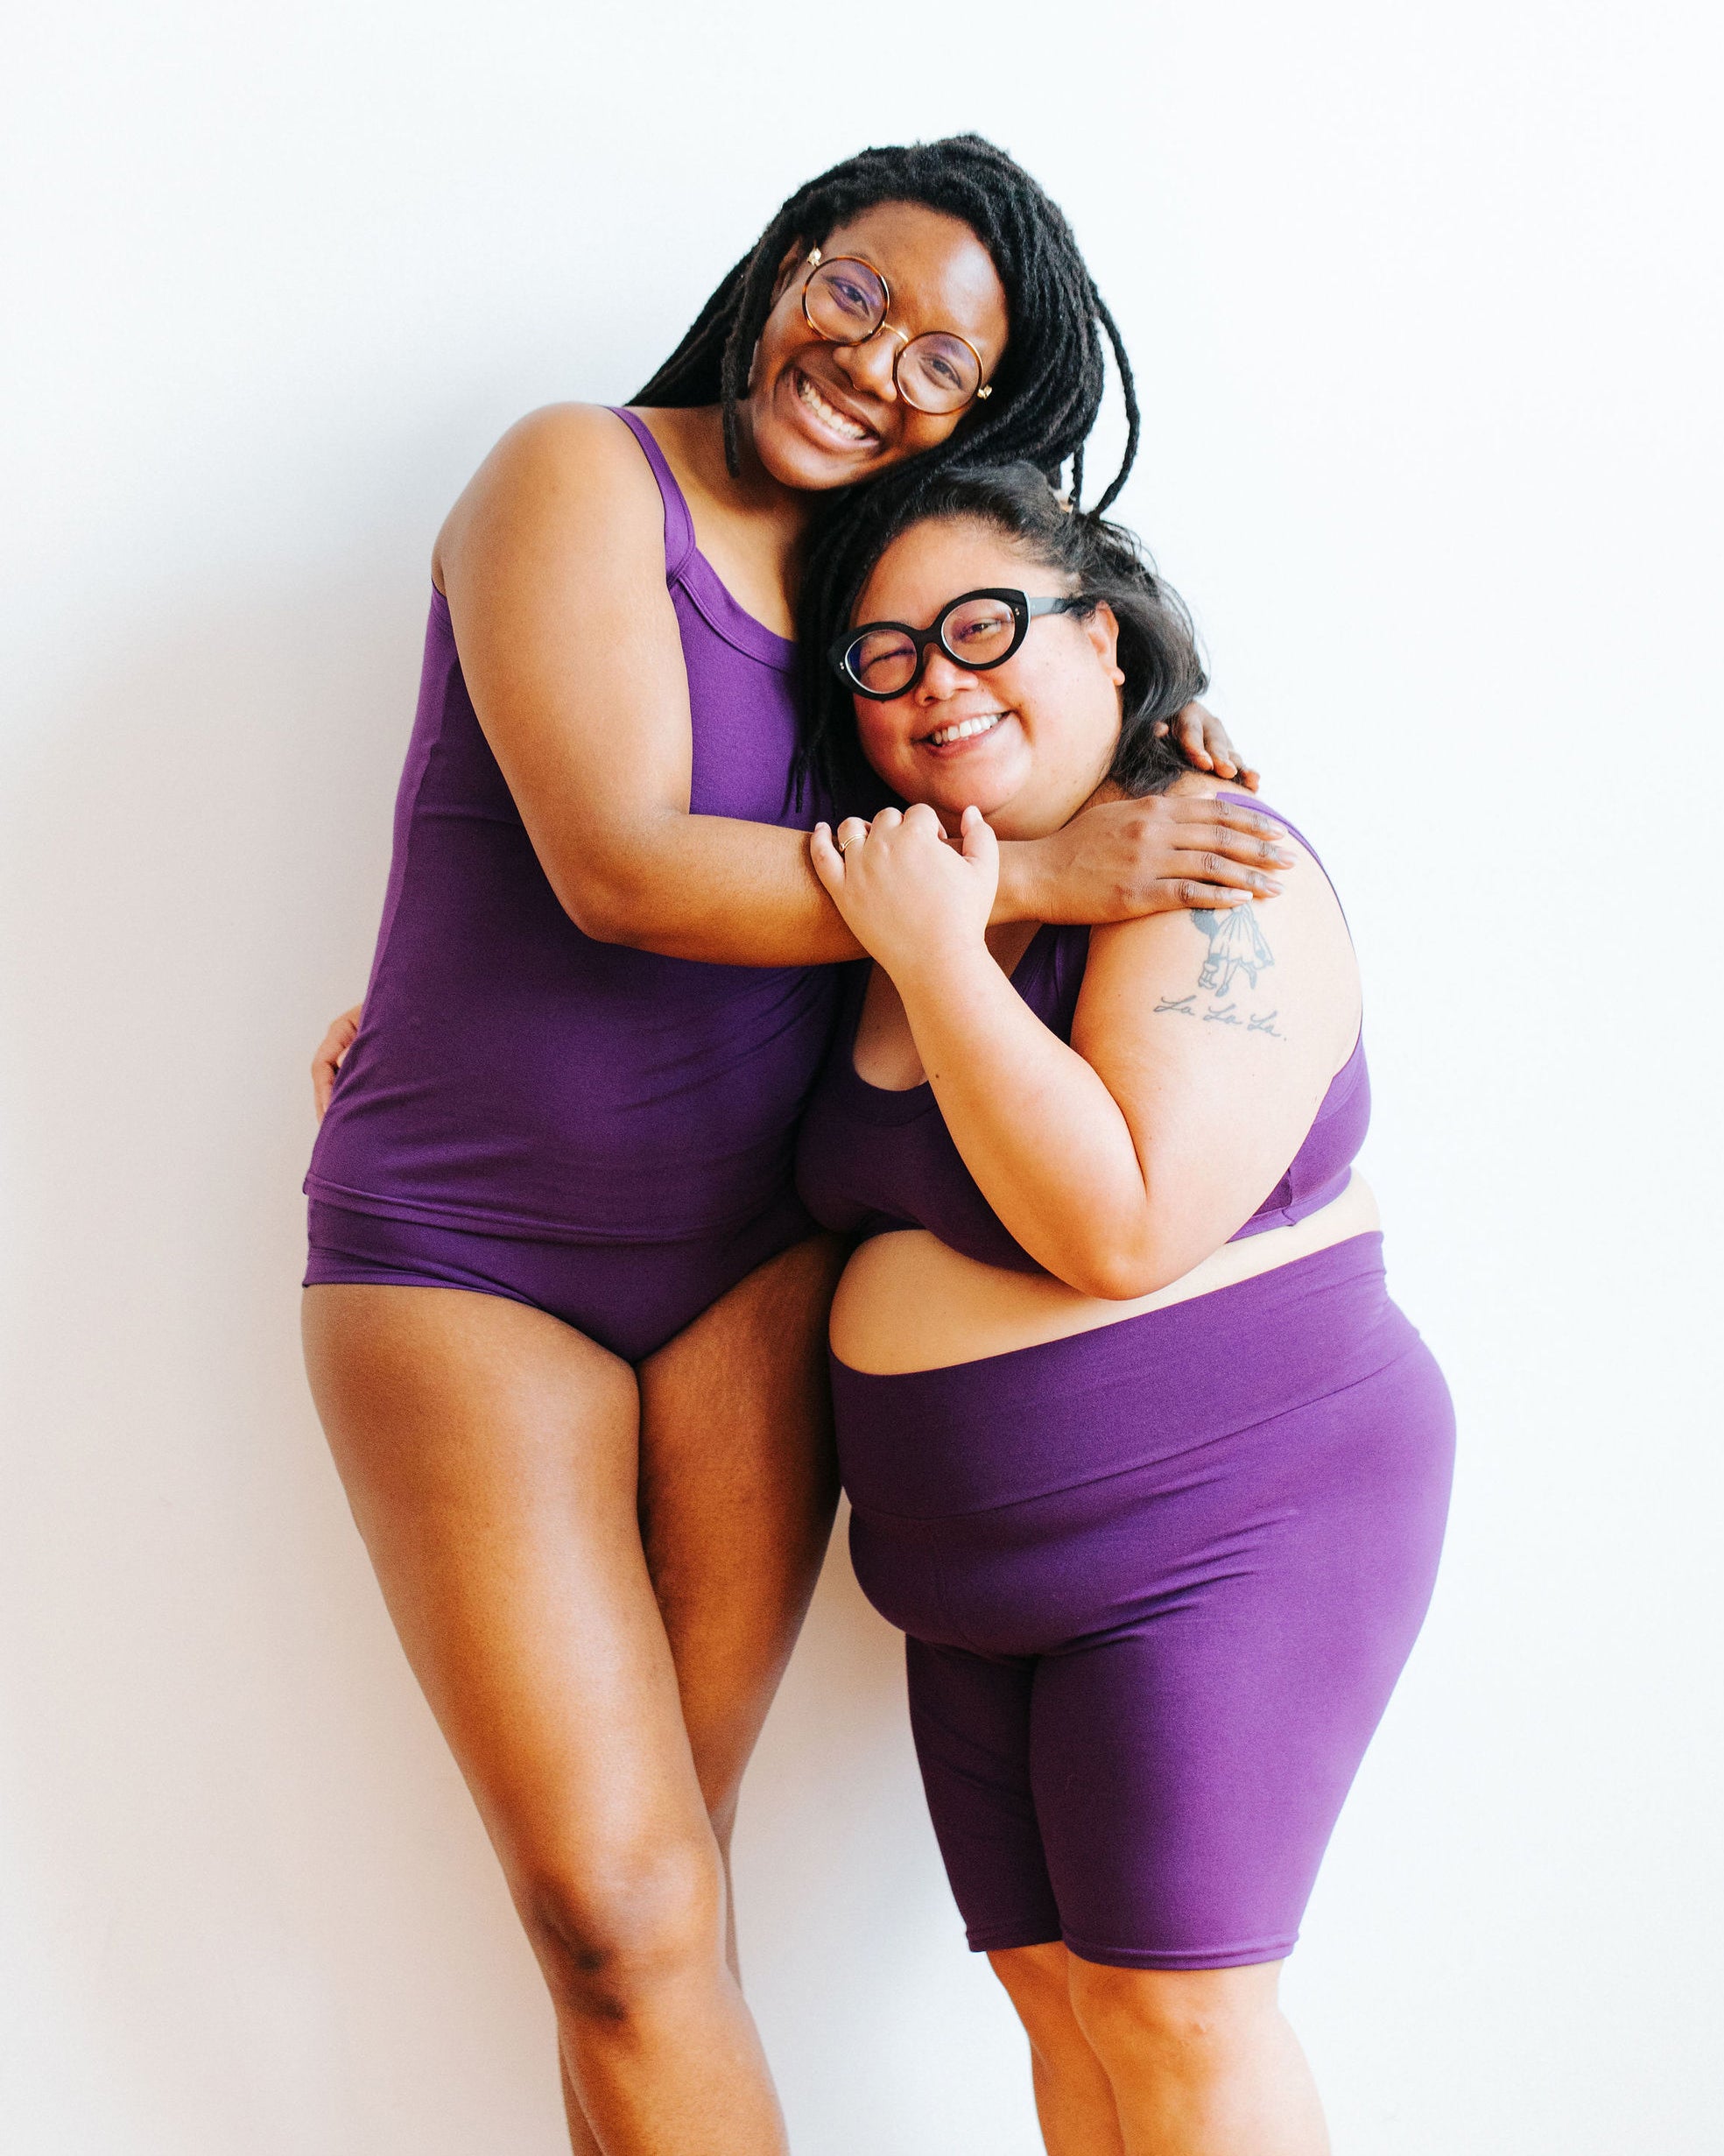 Two models smiling and embracing wearing a Camisole, Hipster style underwear, Bralette, and Bike Shorts in Deep Amethyst.